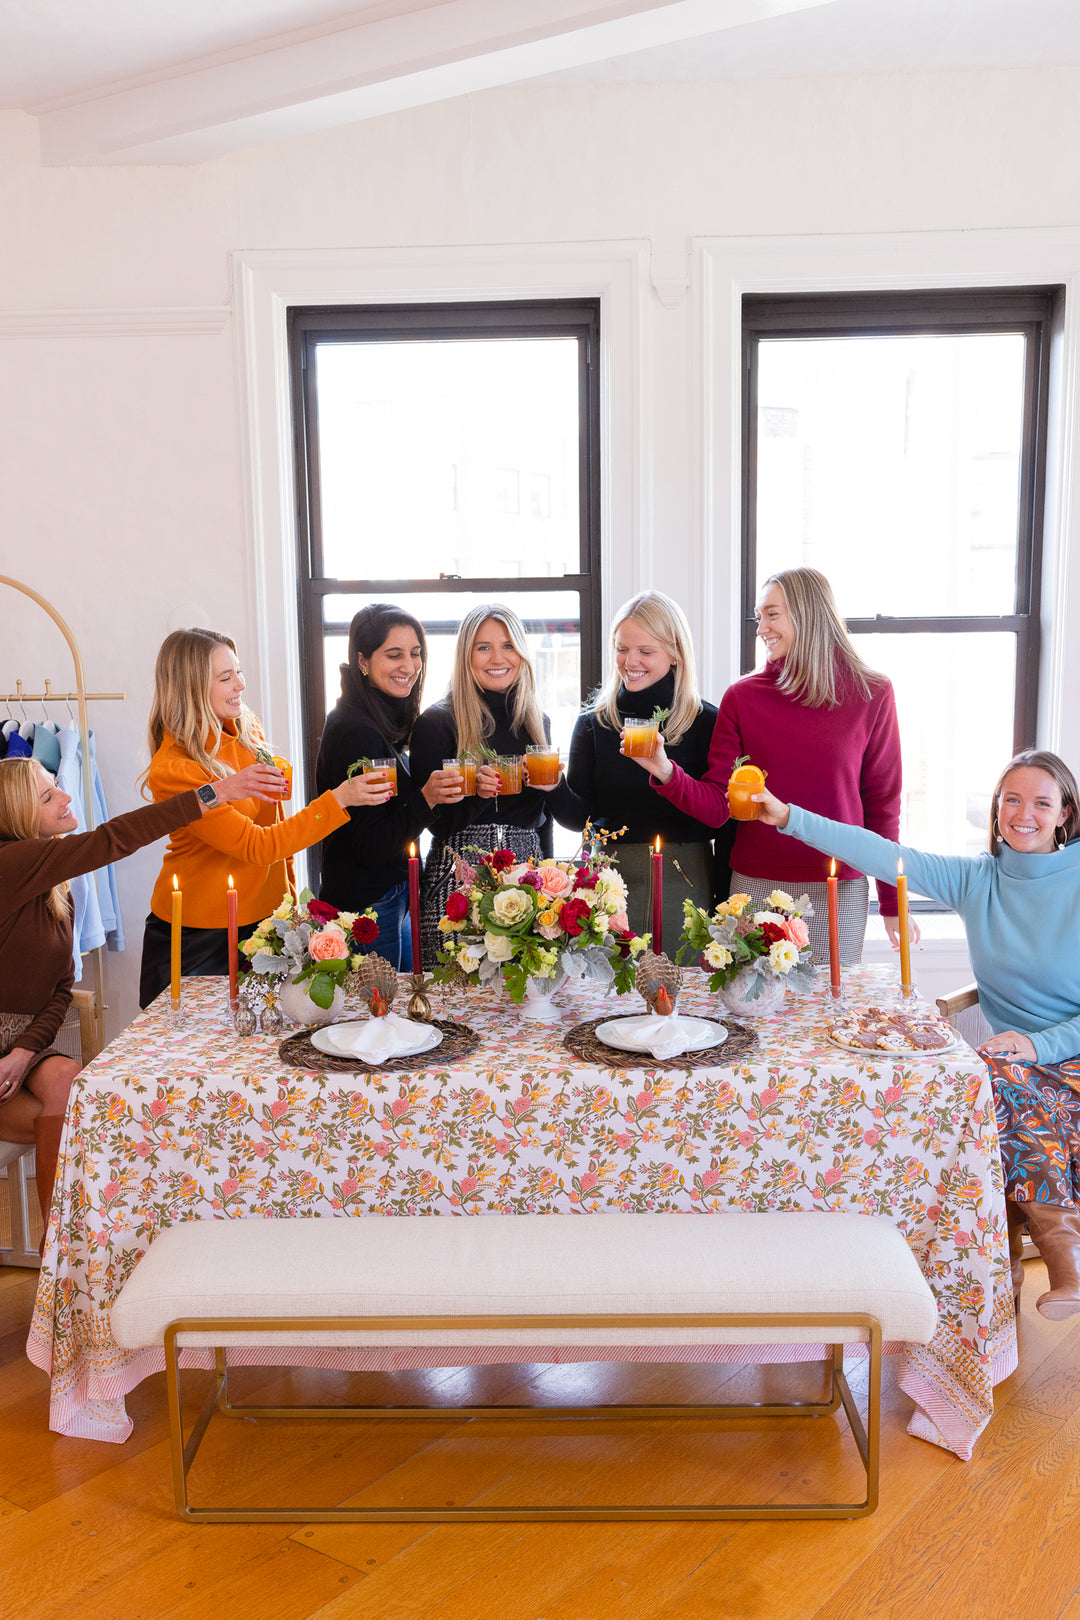 Cheers to Friends, Festivity—and Fleece